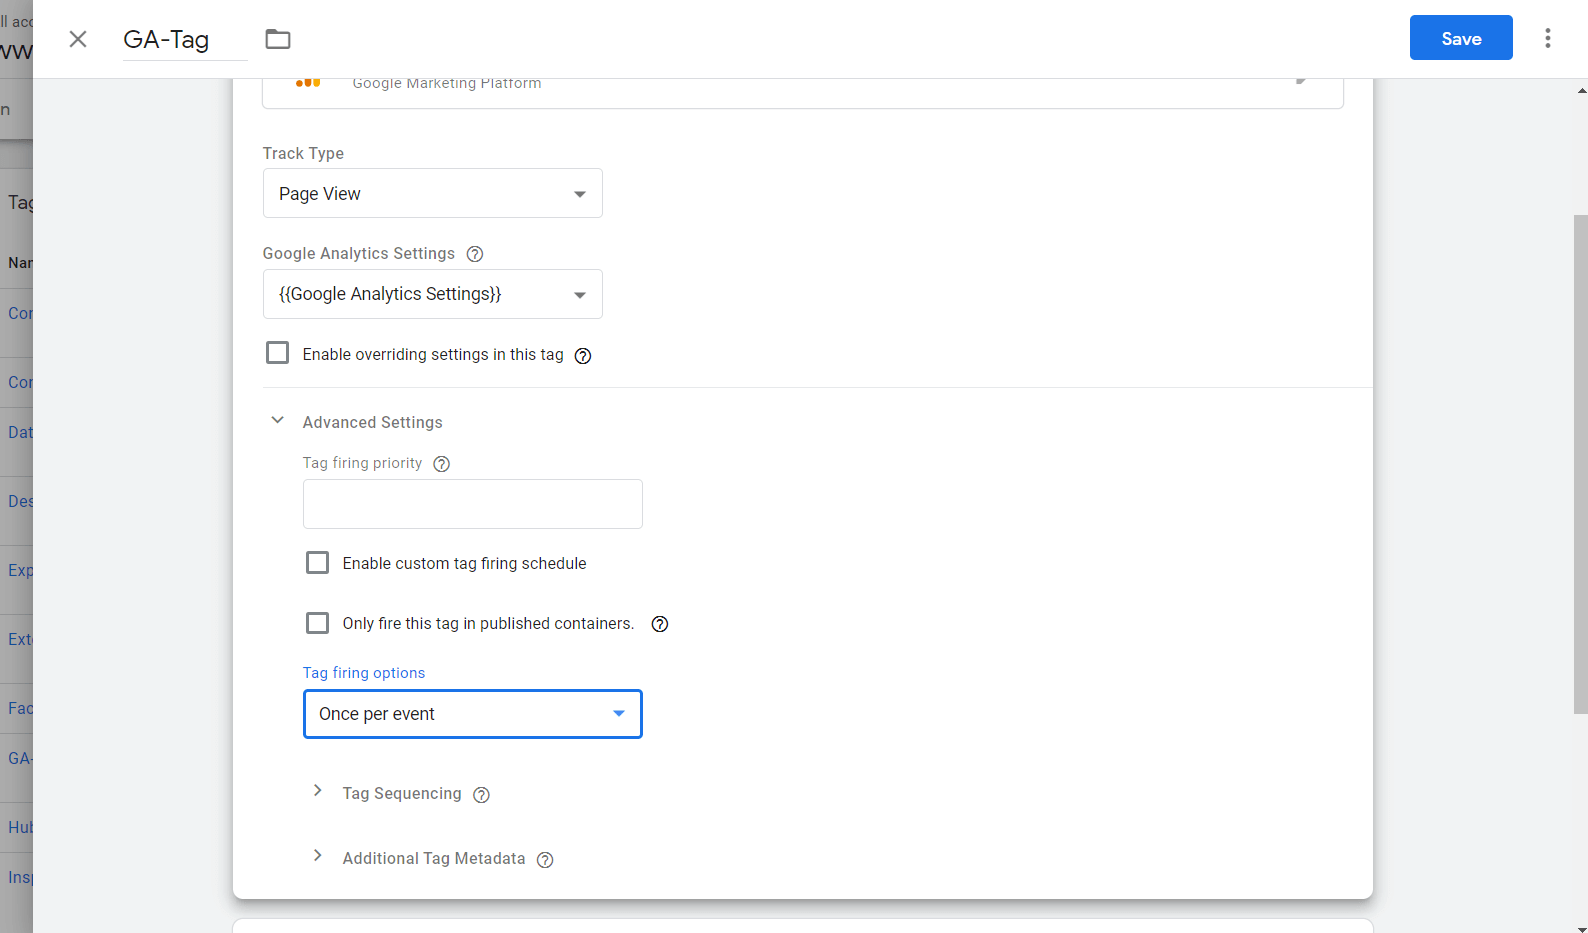 set tag firing options to once per event